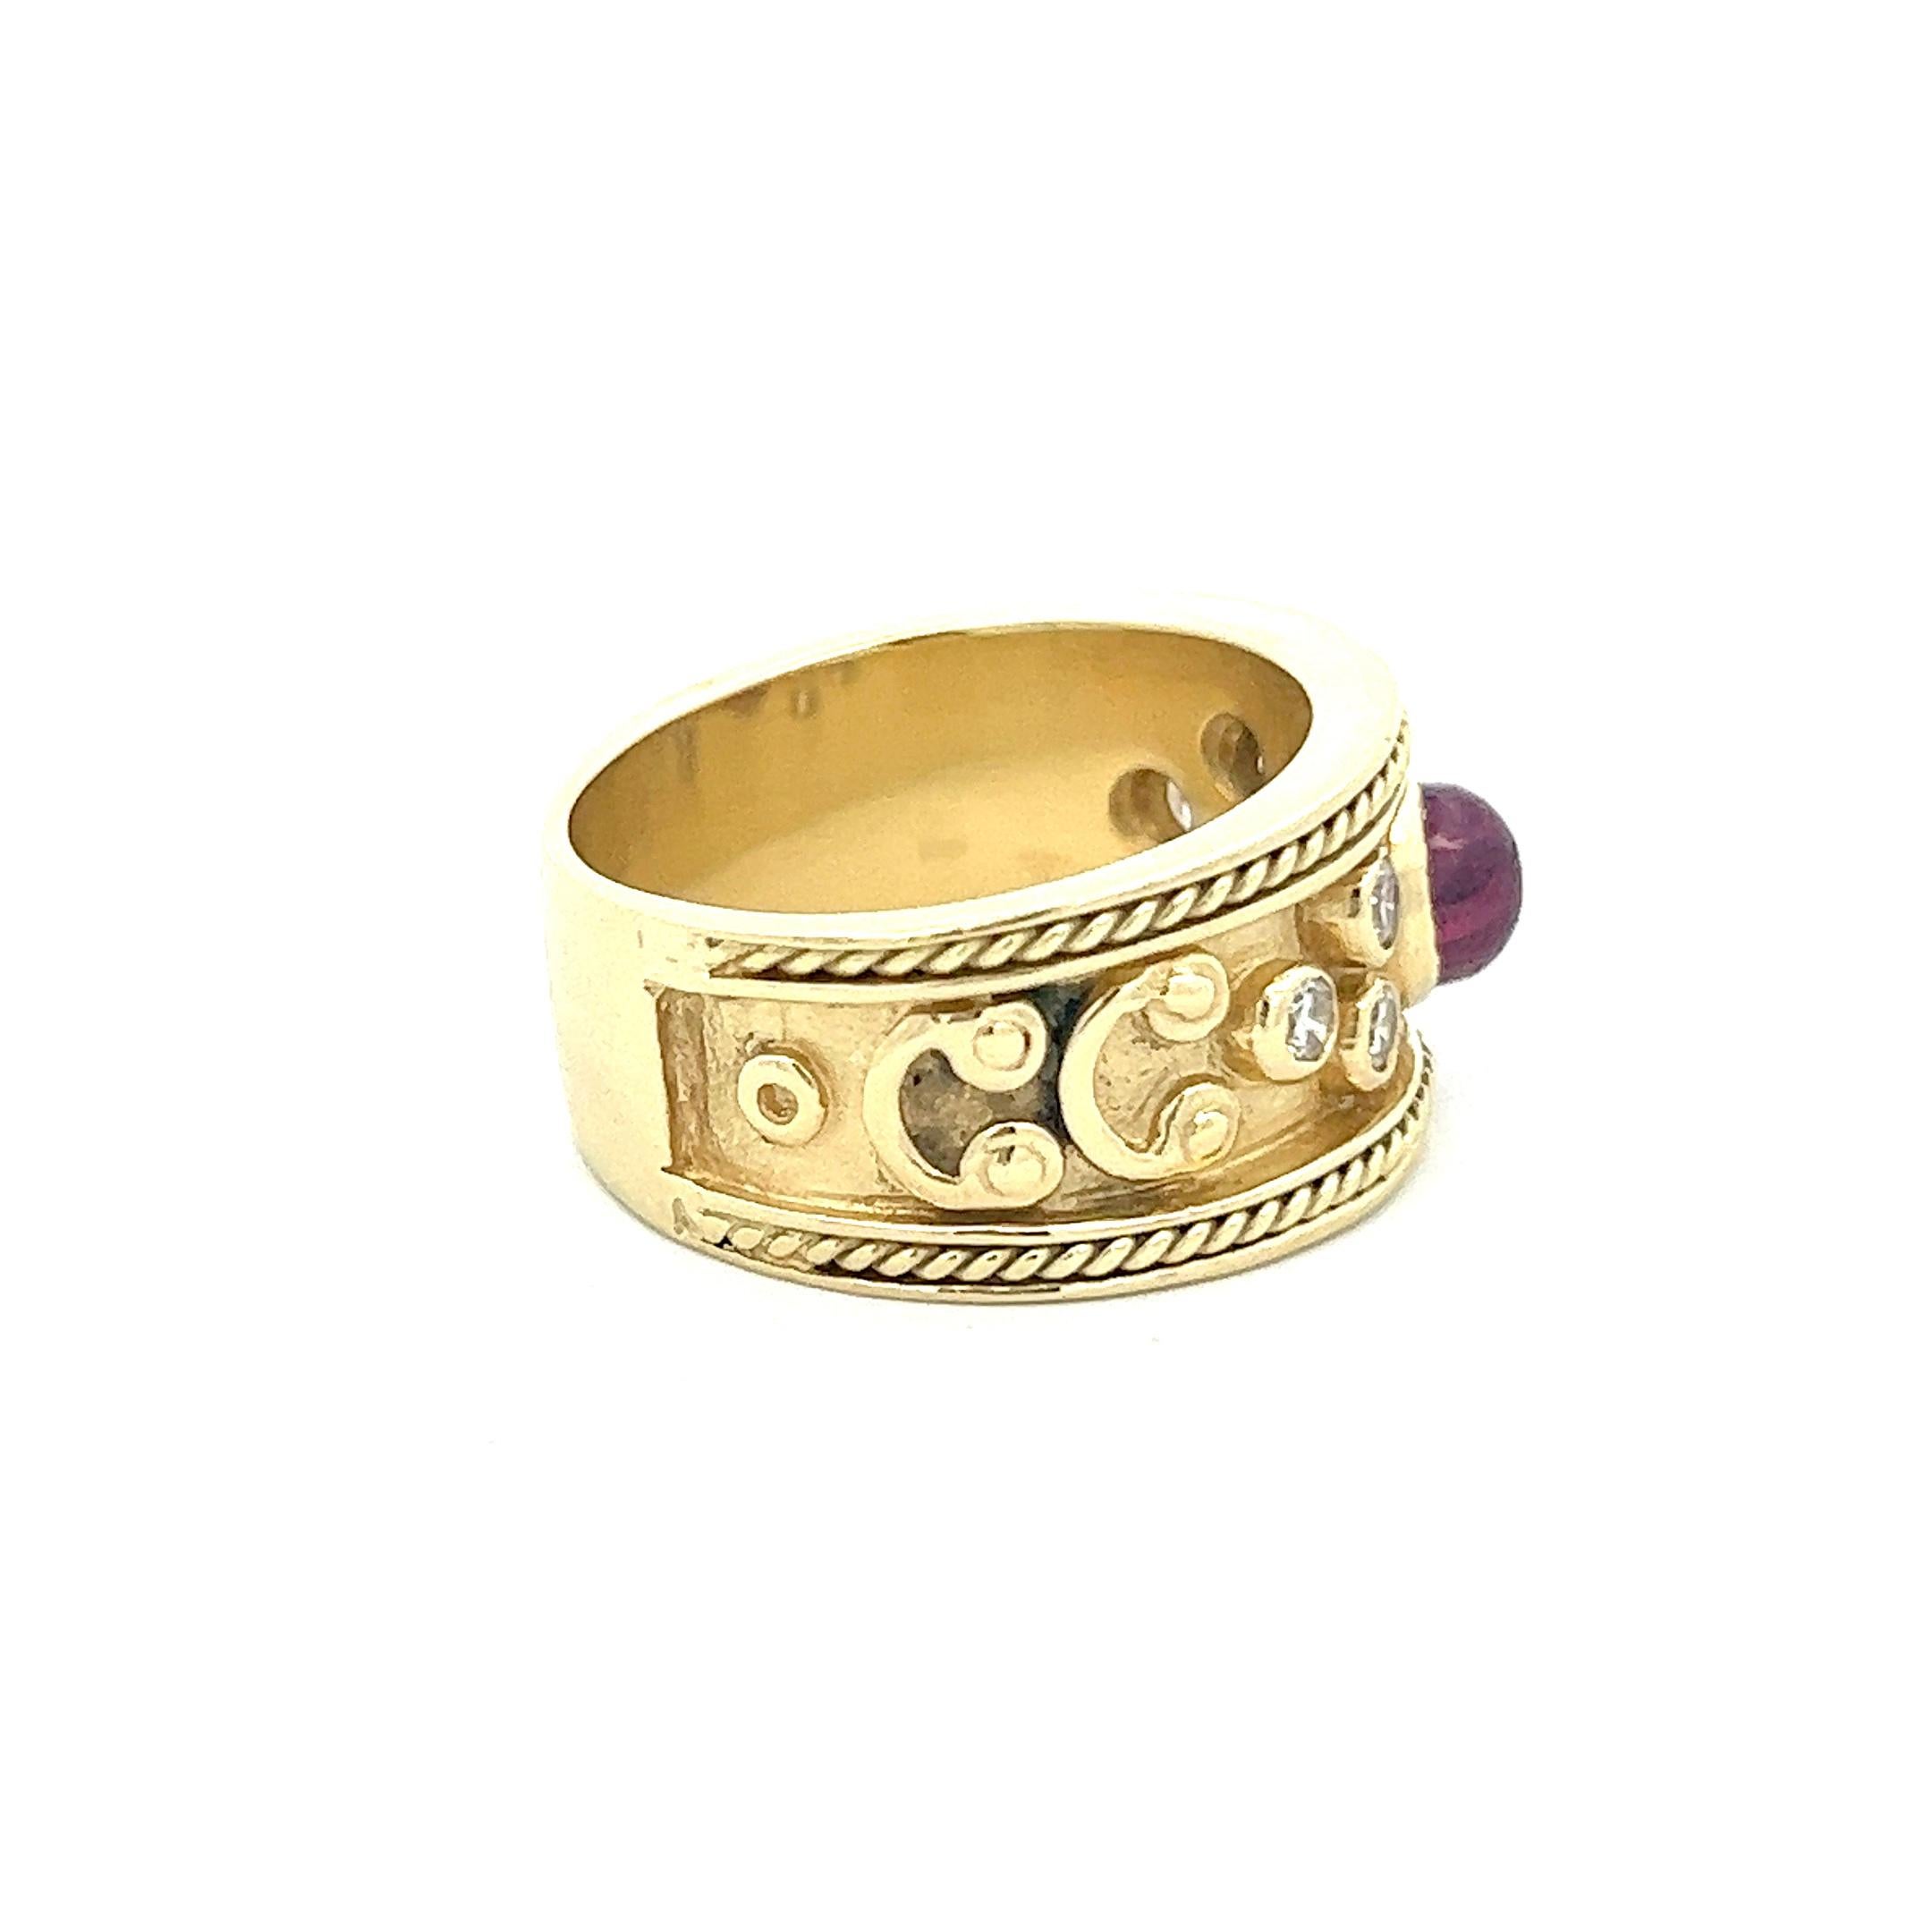 An incredible Etruscan-style ring presenting a cabochon ruby accented by six radiant round brilliant diamonds. The ruby weighs approximately 1.33 cts and the diamonds are approximately 0.34 ctw. The ring is a size 8 (sizeable) and is crafted of 18k